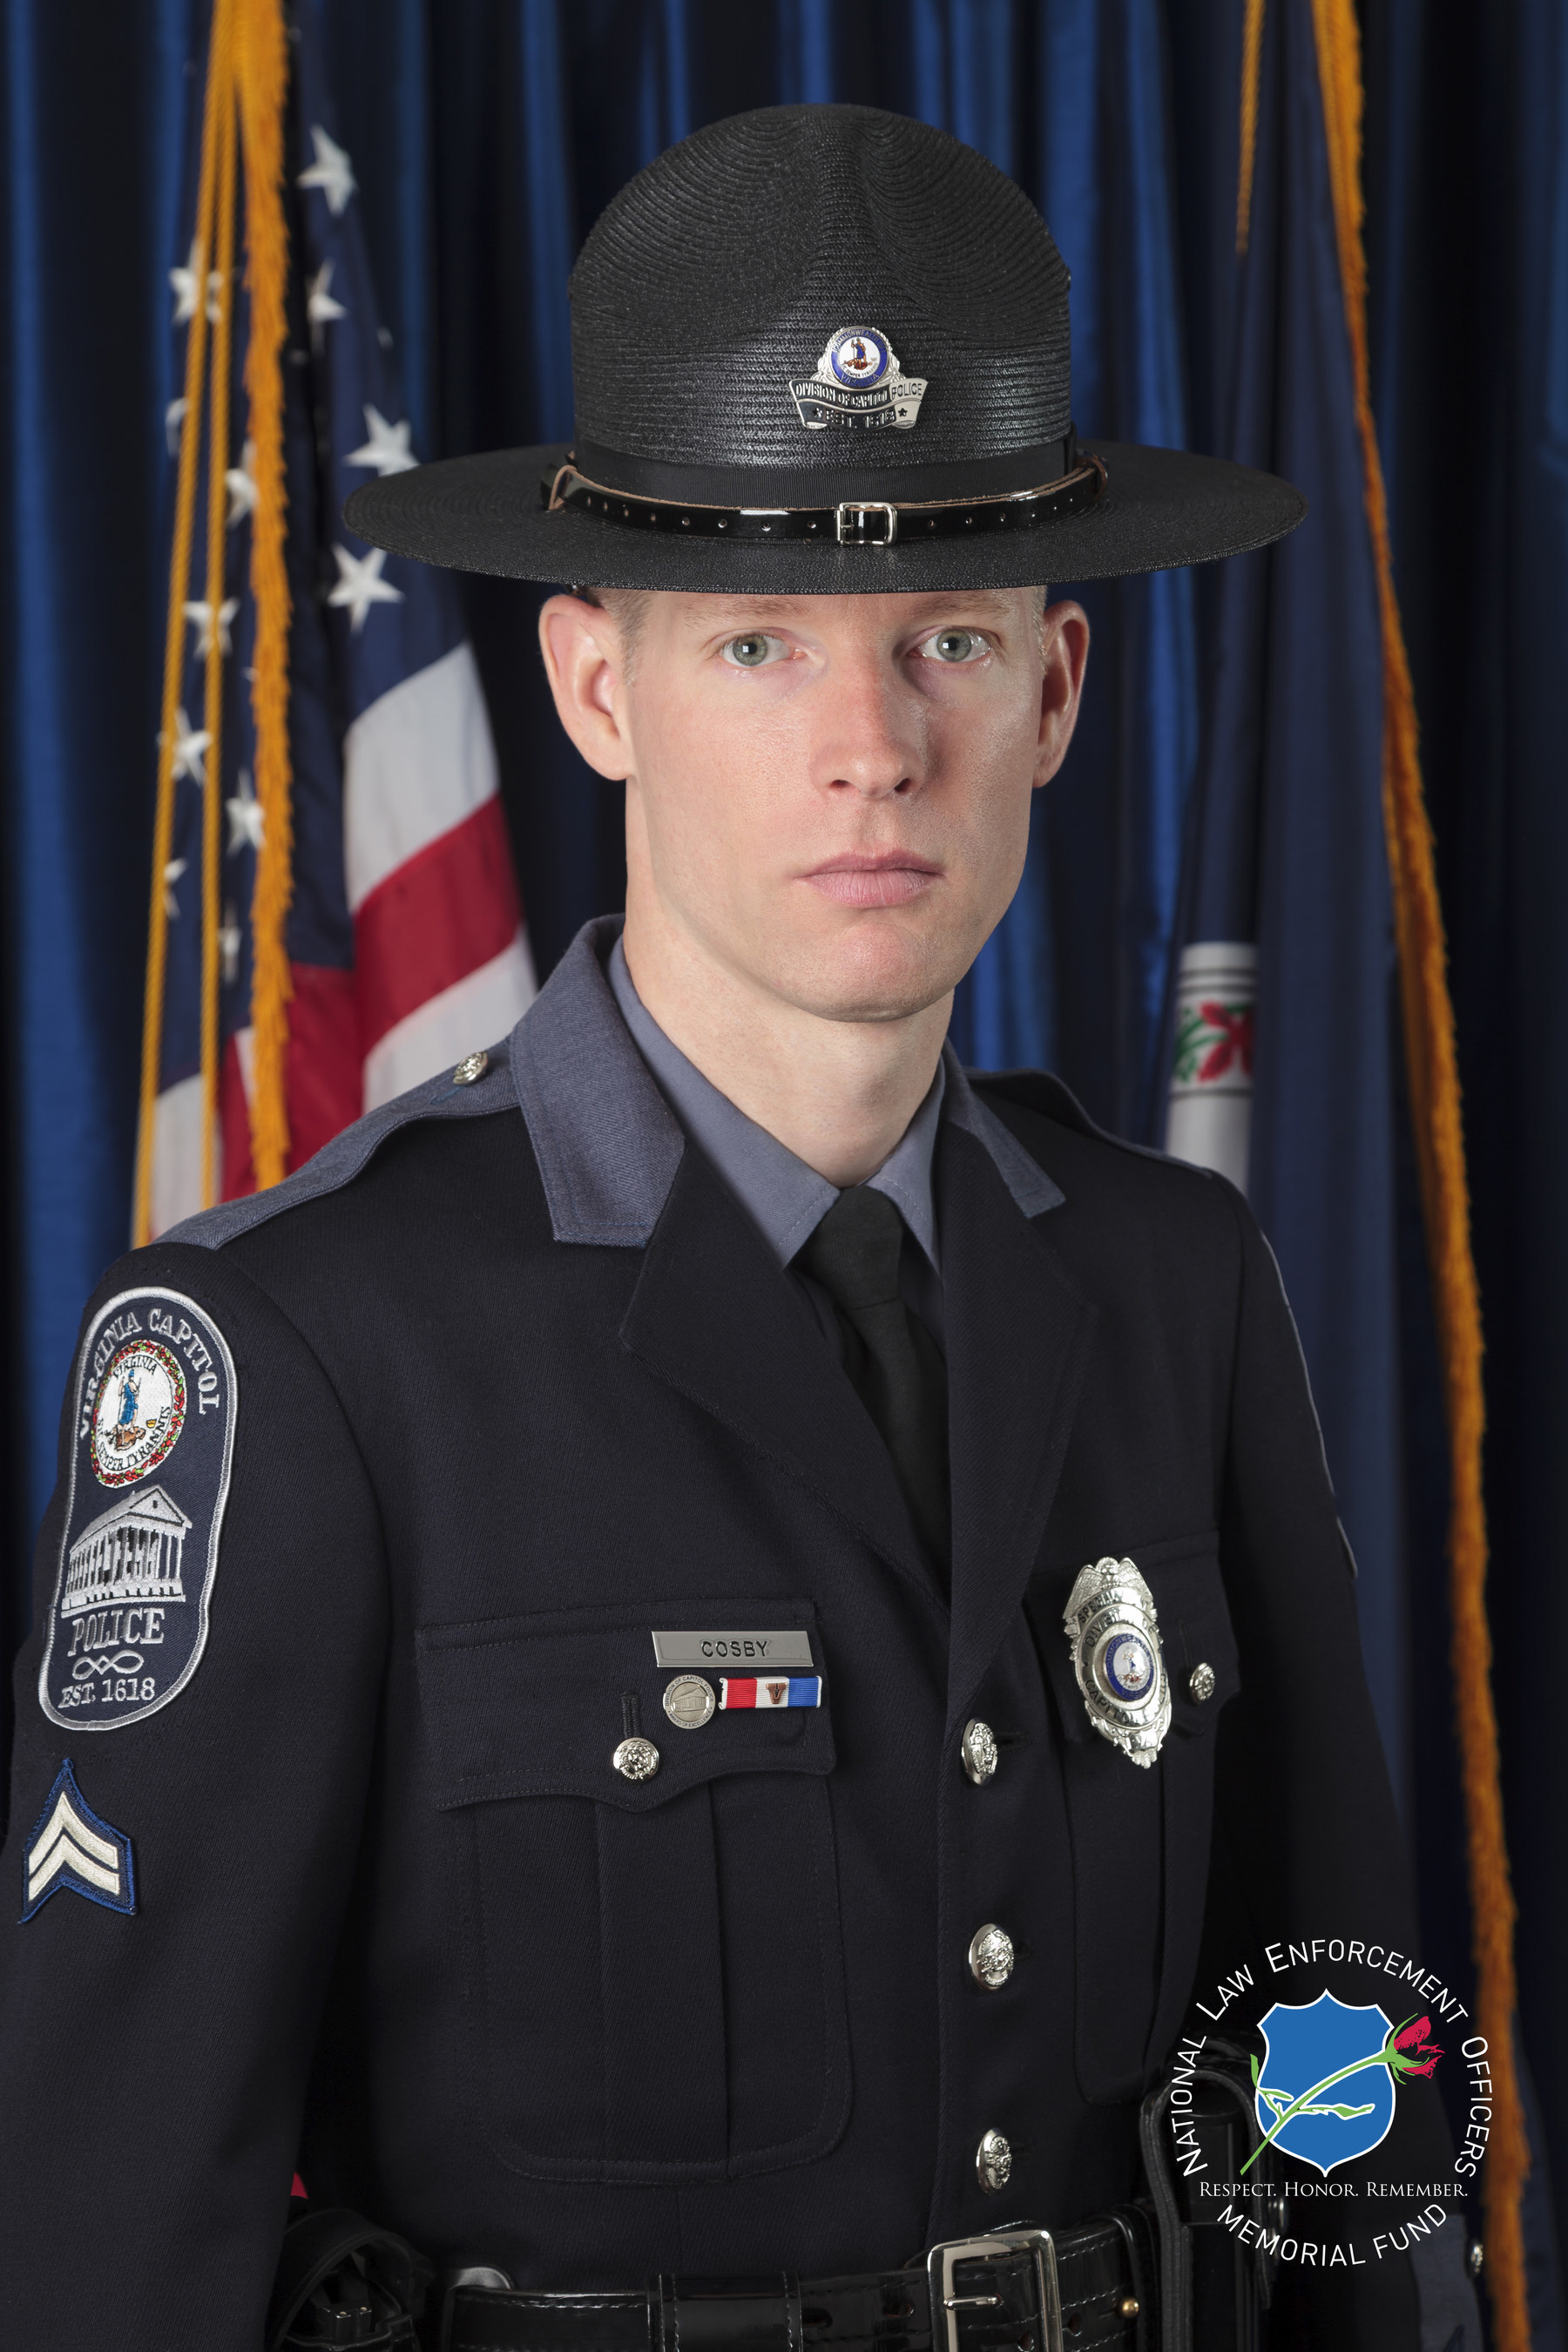 The National Law Enforcement Officers Memorial Fund has selected Corporal James L. Cosby Jr., from the Division of Capitol Police in the Commonwealth of Virginia, as the recipient of its Officer of the Month Award for July 2015.